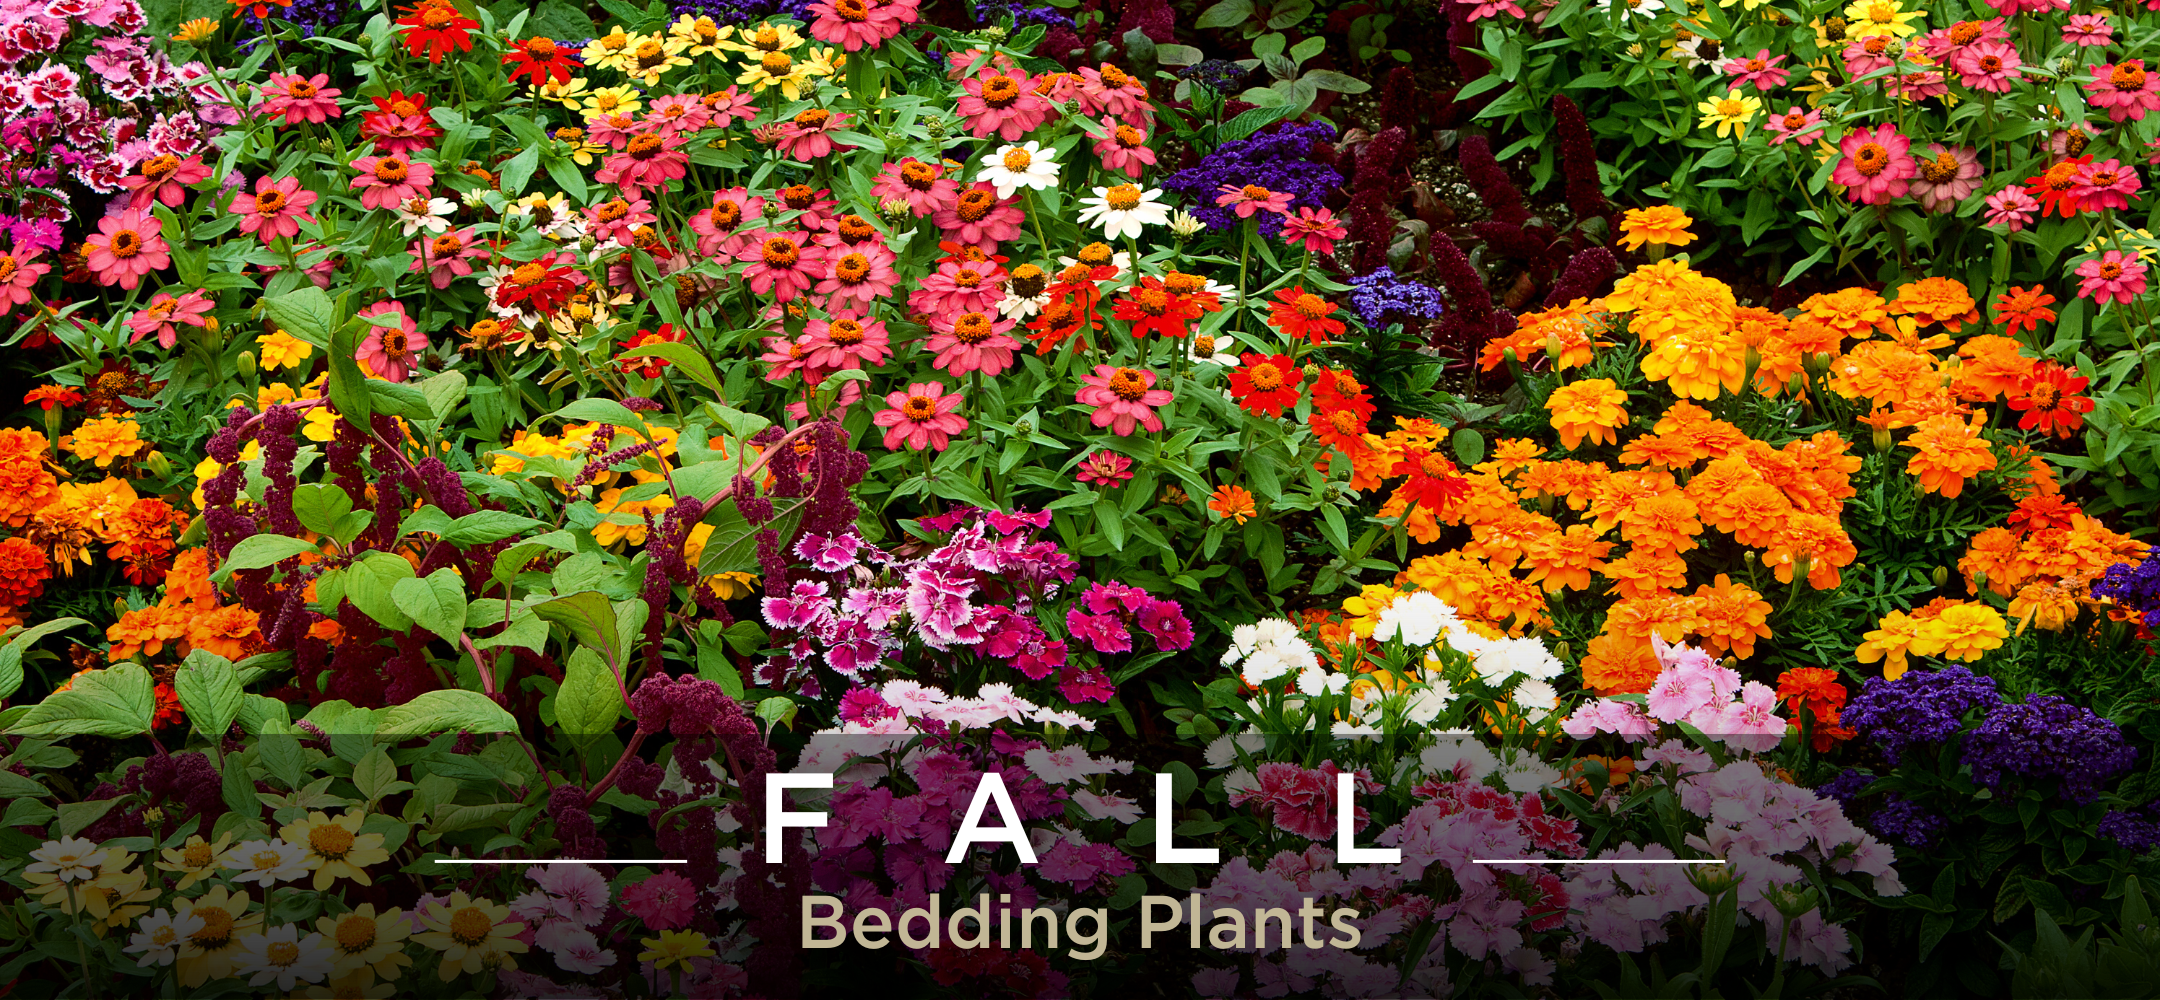 Bedding plants and flowers for fall